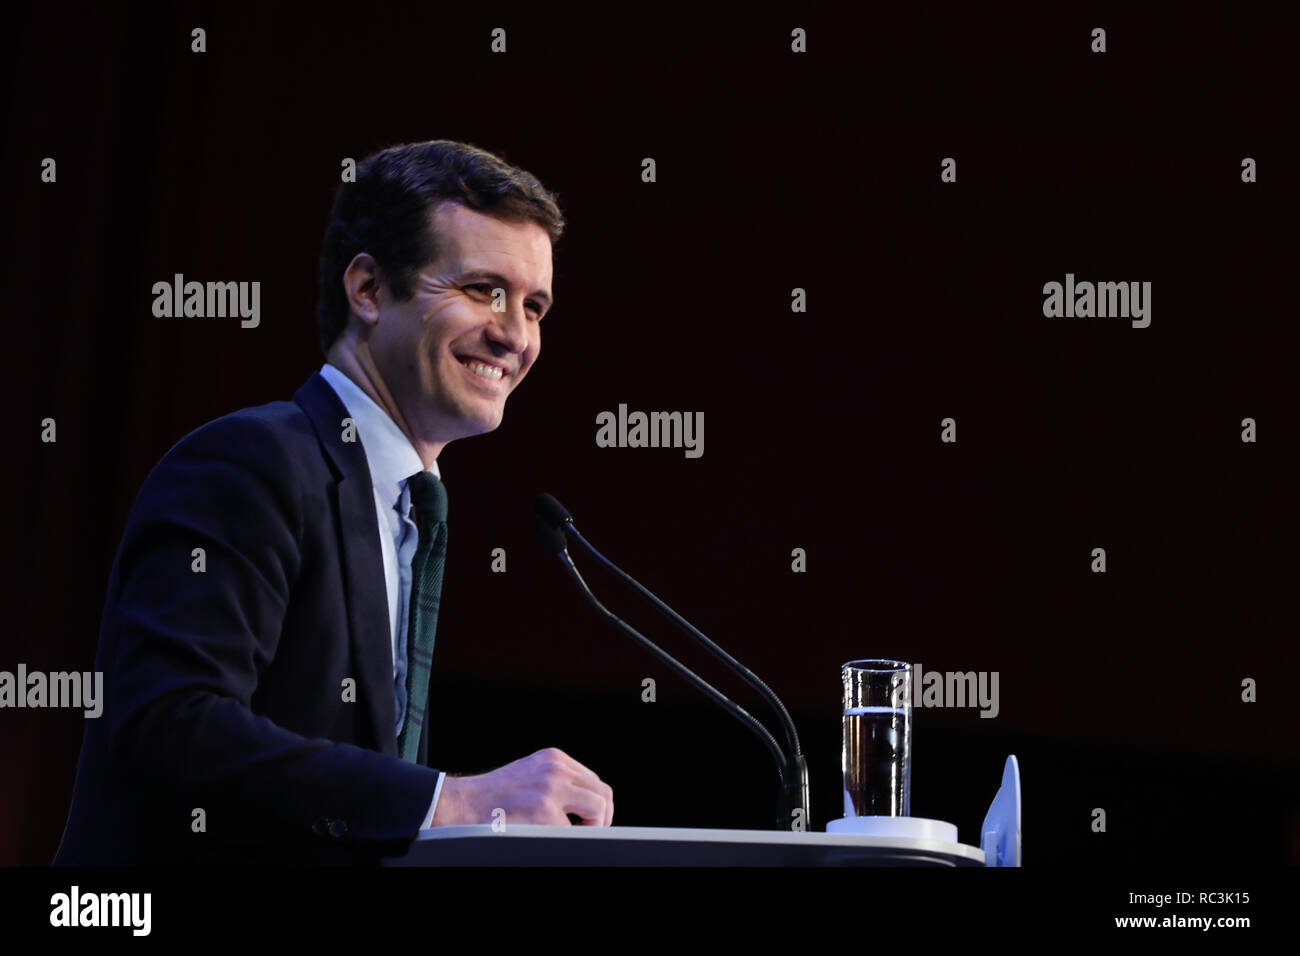 Madrid, Spain. 13th Janaury 2019. PABLO CASADO, President of the National Popular Party presenting the candidates to the assistants. The PP of Madrid has celebrated this Sunday a multitudinous act in the theater Goya the presentation of José Luis Martínez-Almeida and Isabel Díaz Ayuso that will be the candidates of the PP to the City council and the Community of Madrid, respectively, for the next regional and local elections of May on Jan 13, 2019 in Madrid, Spain Credit: Jesús Hellin/Alamy Live News Stock Photo